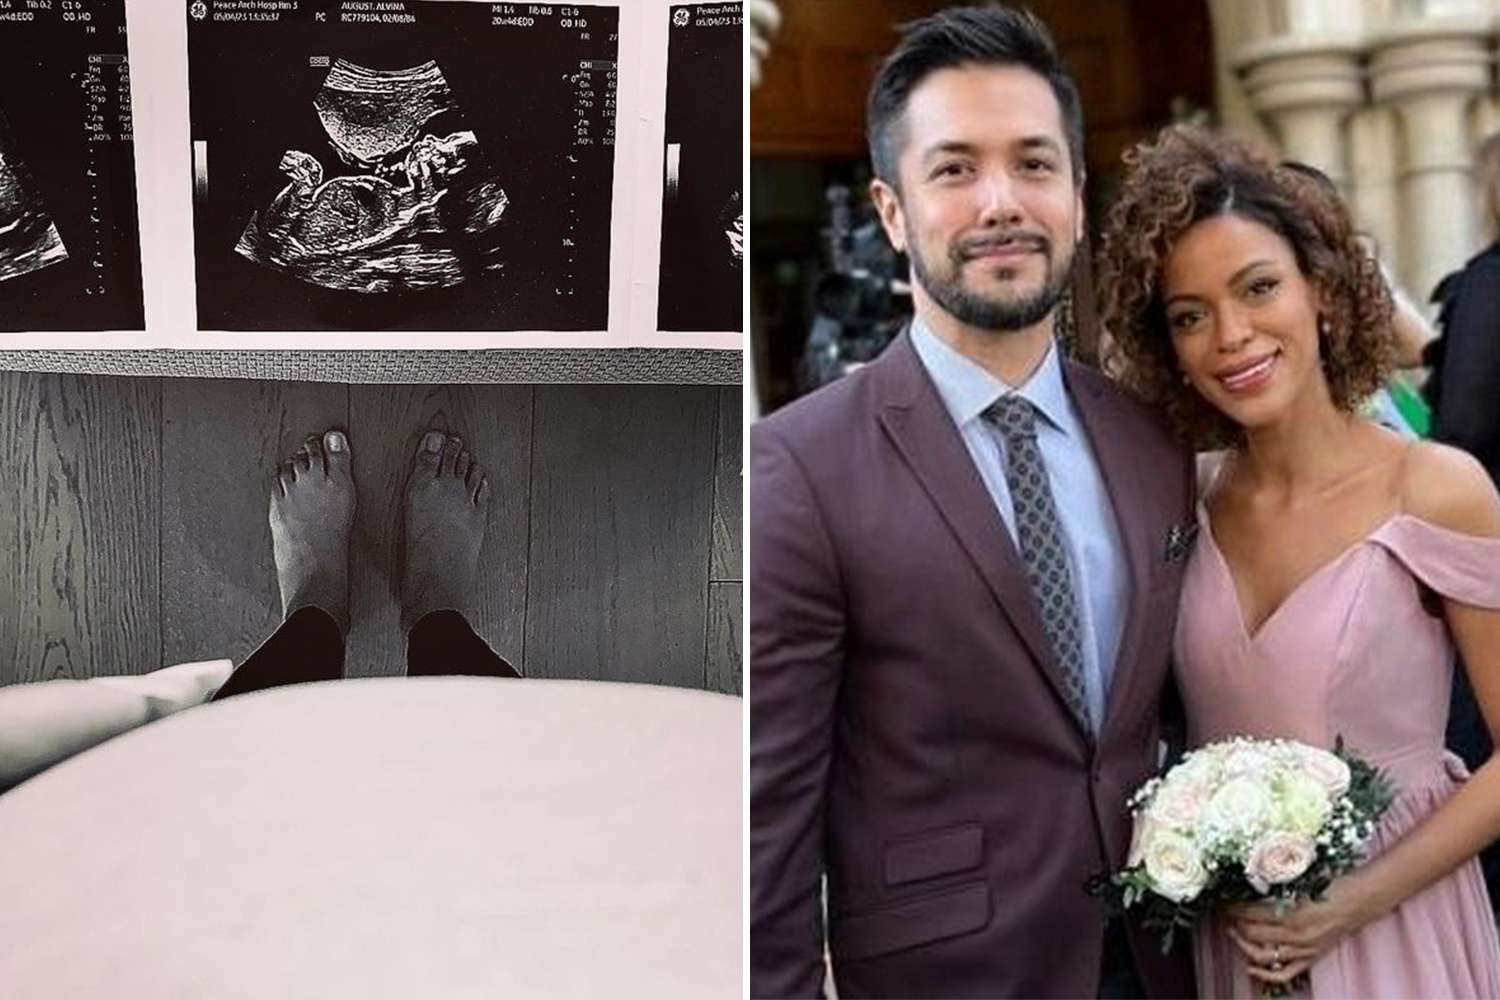 Hallmark Couple Alvina August and Marco Grazzini Expecting Their First Baby, Due This Summer